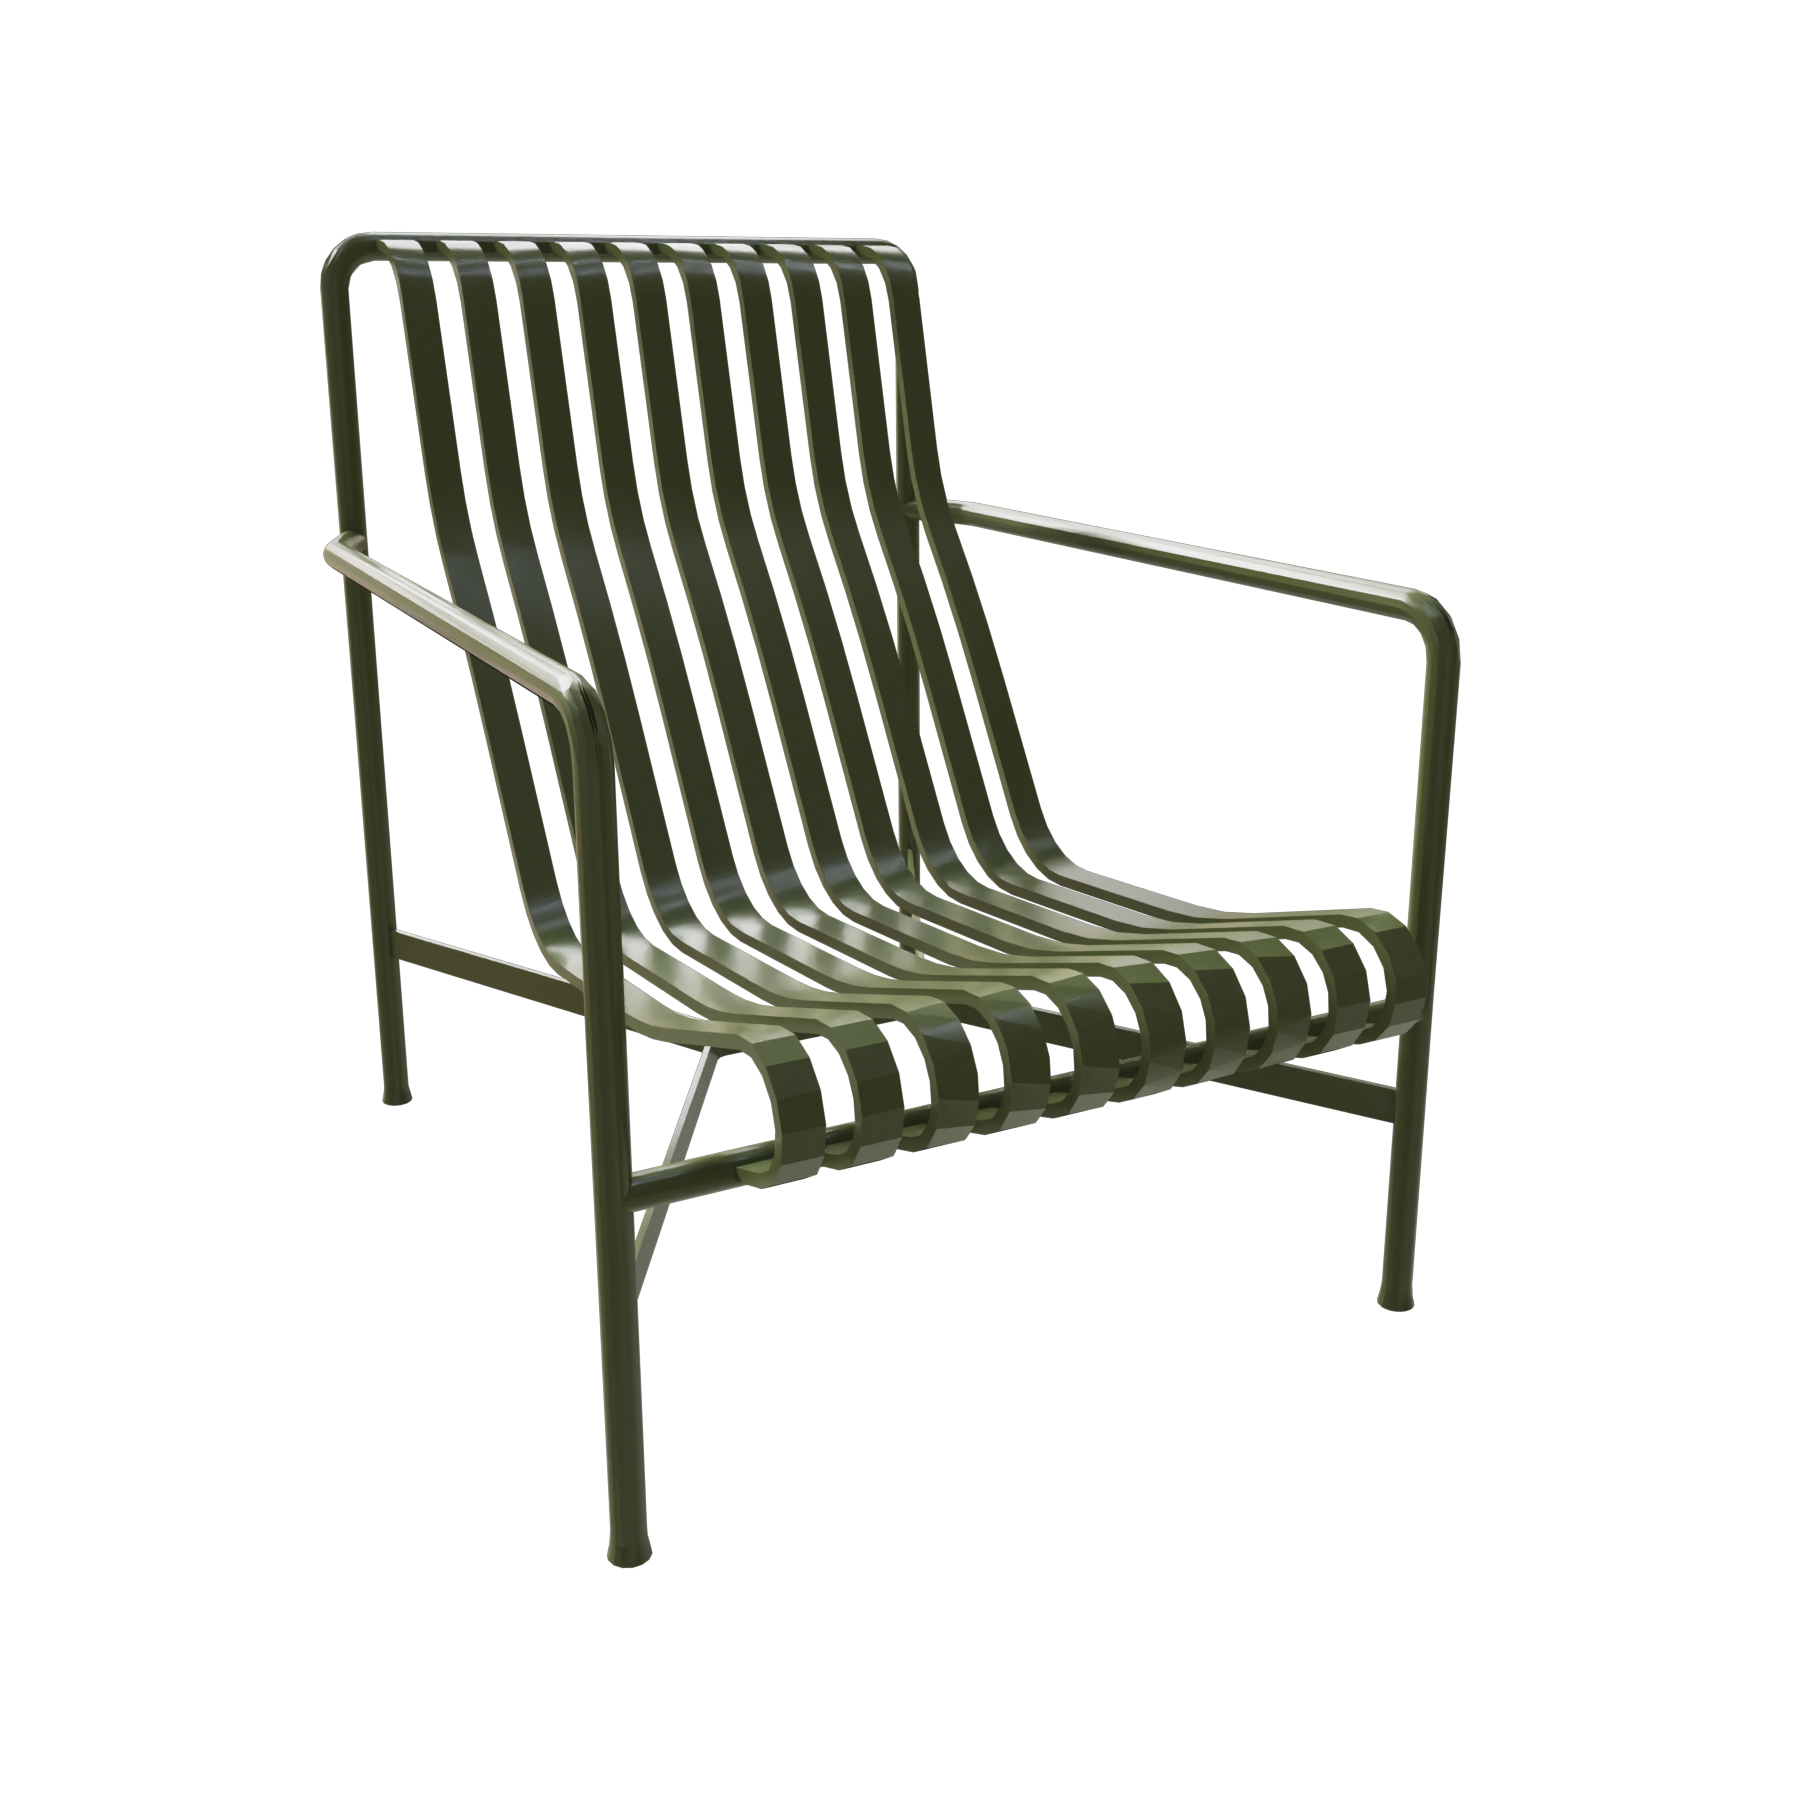 Lounge Chair High Palissade Olive Green 812033-1509000